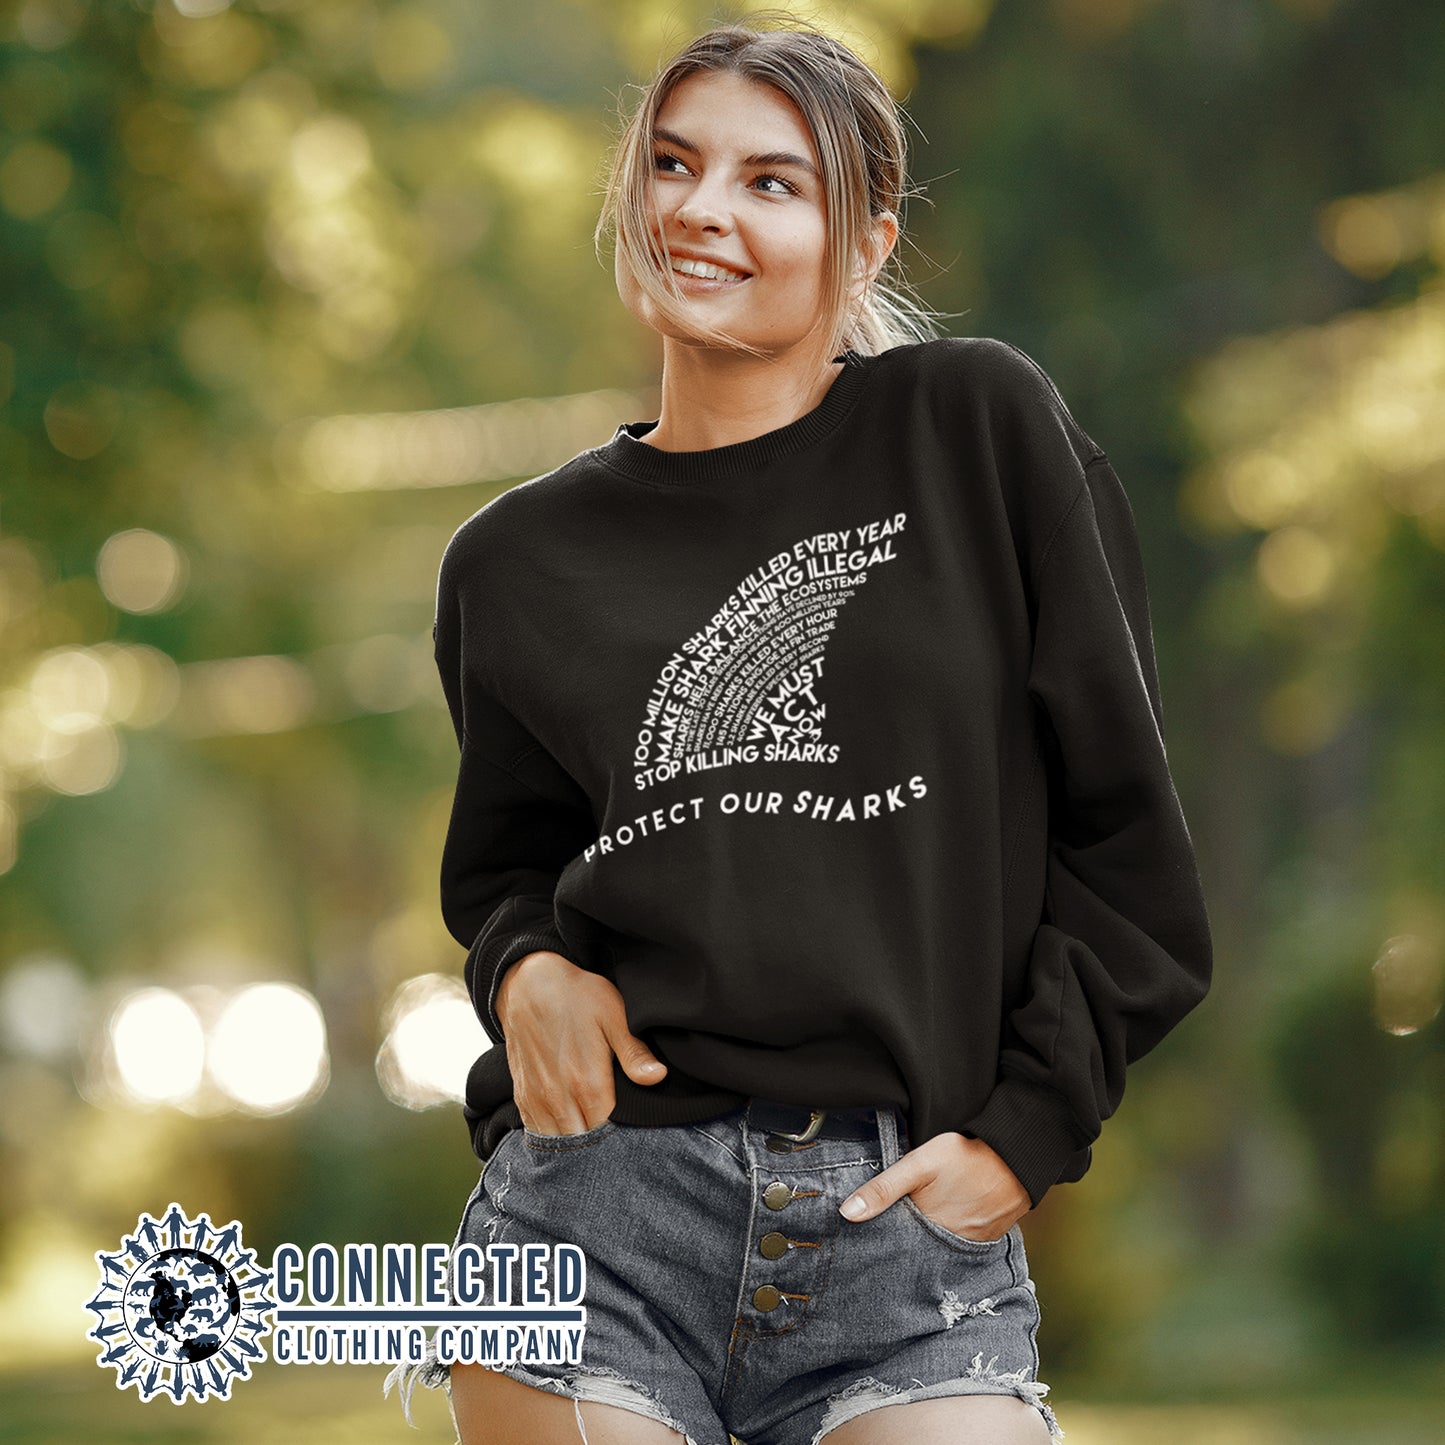 Model Wearing Black Protect Our Sharks Unisex Crewneck Sweatshirt - architectconstructor - Ethically and Sustainably Made - 10% of profits donated to shark conservation and ocean conservation